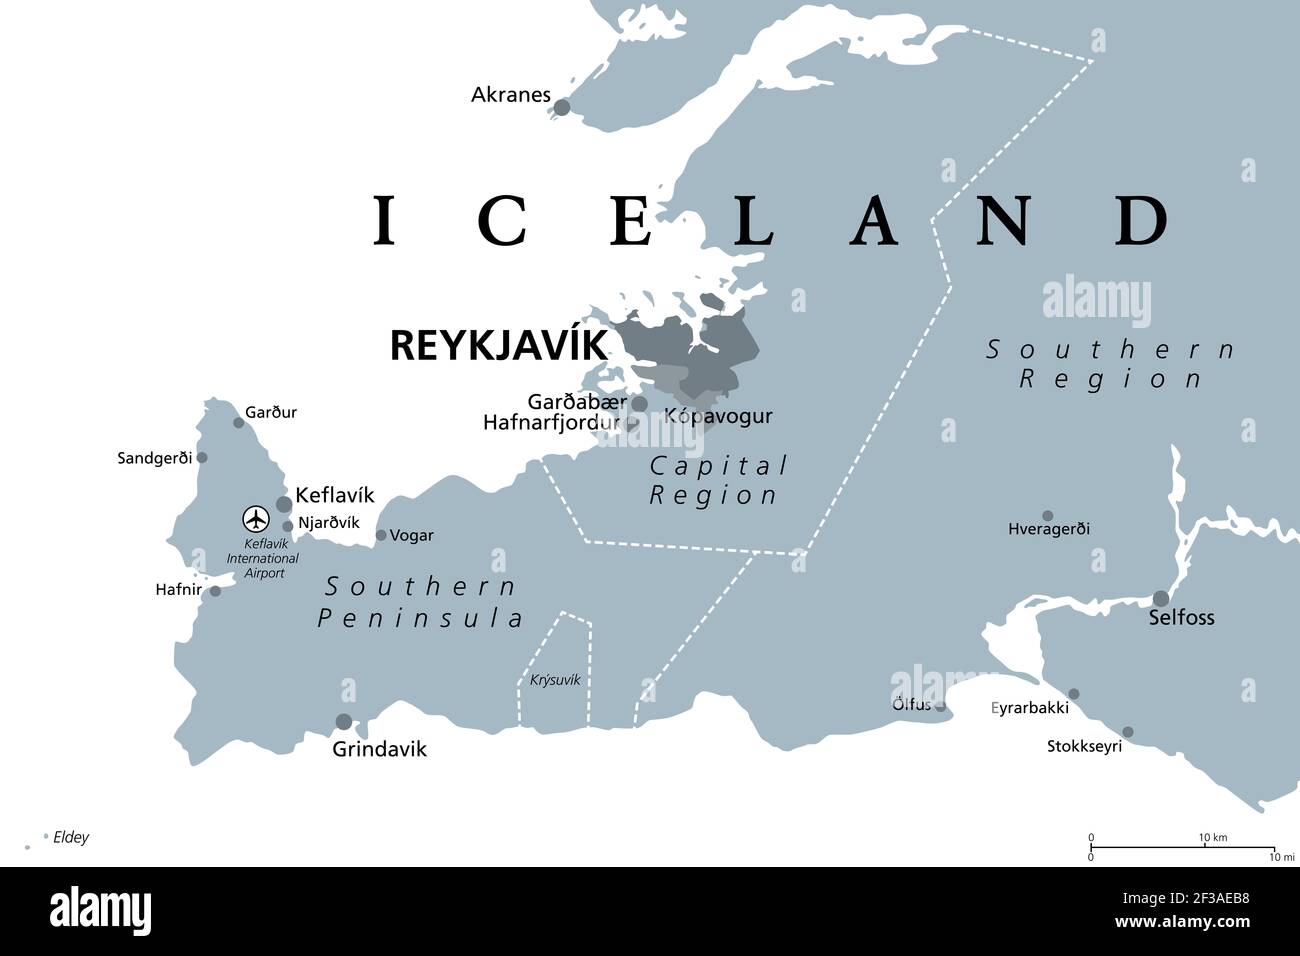 Iceland, Capital Region and Southern Peninsula, gray political map. Reykjavik and vicinity, with Reykjanes Peninsula, a region in southwest Iceland. Stock Photo